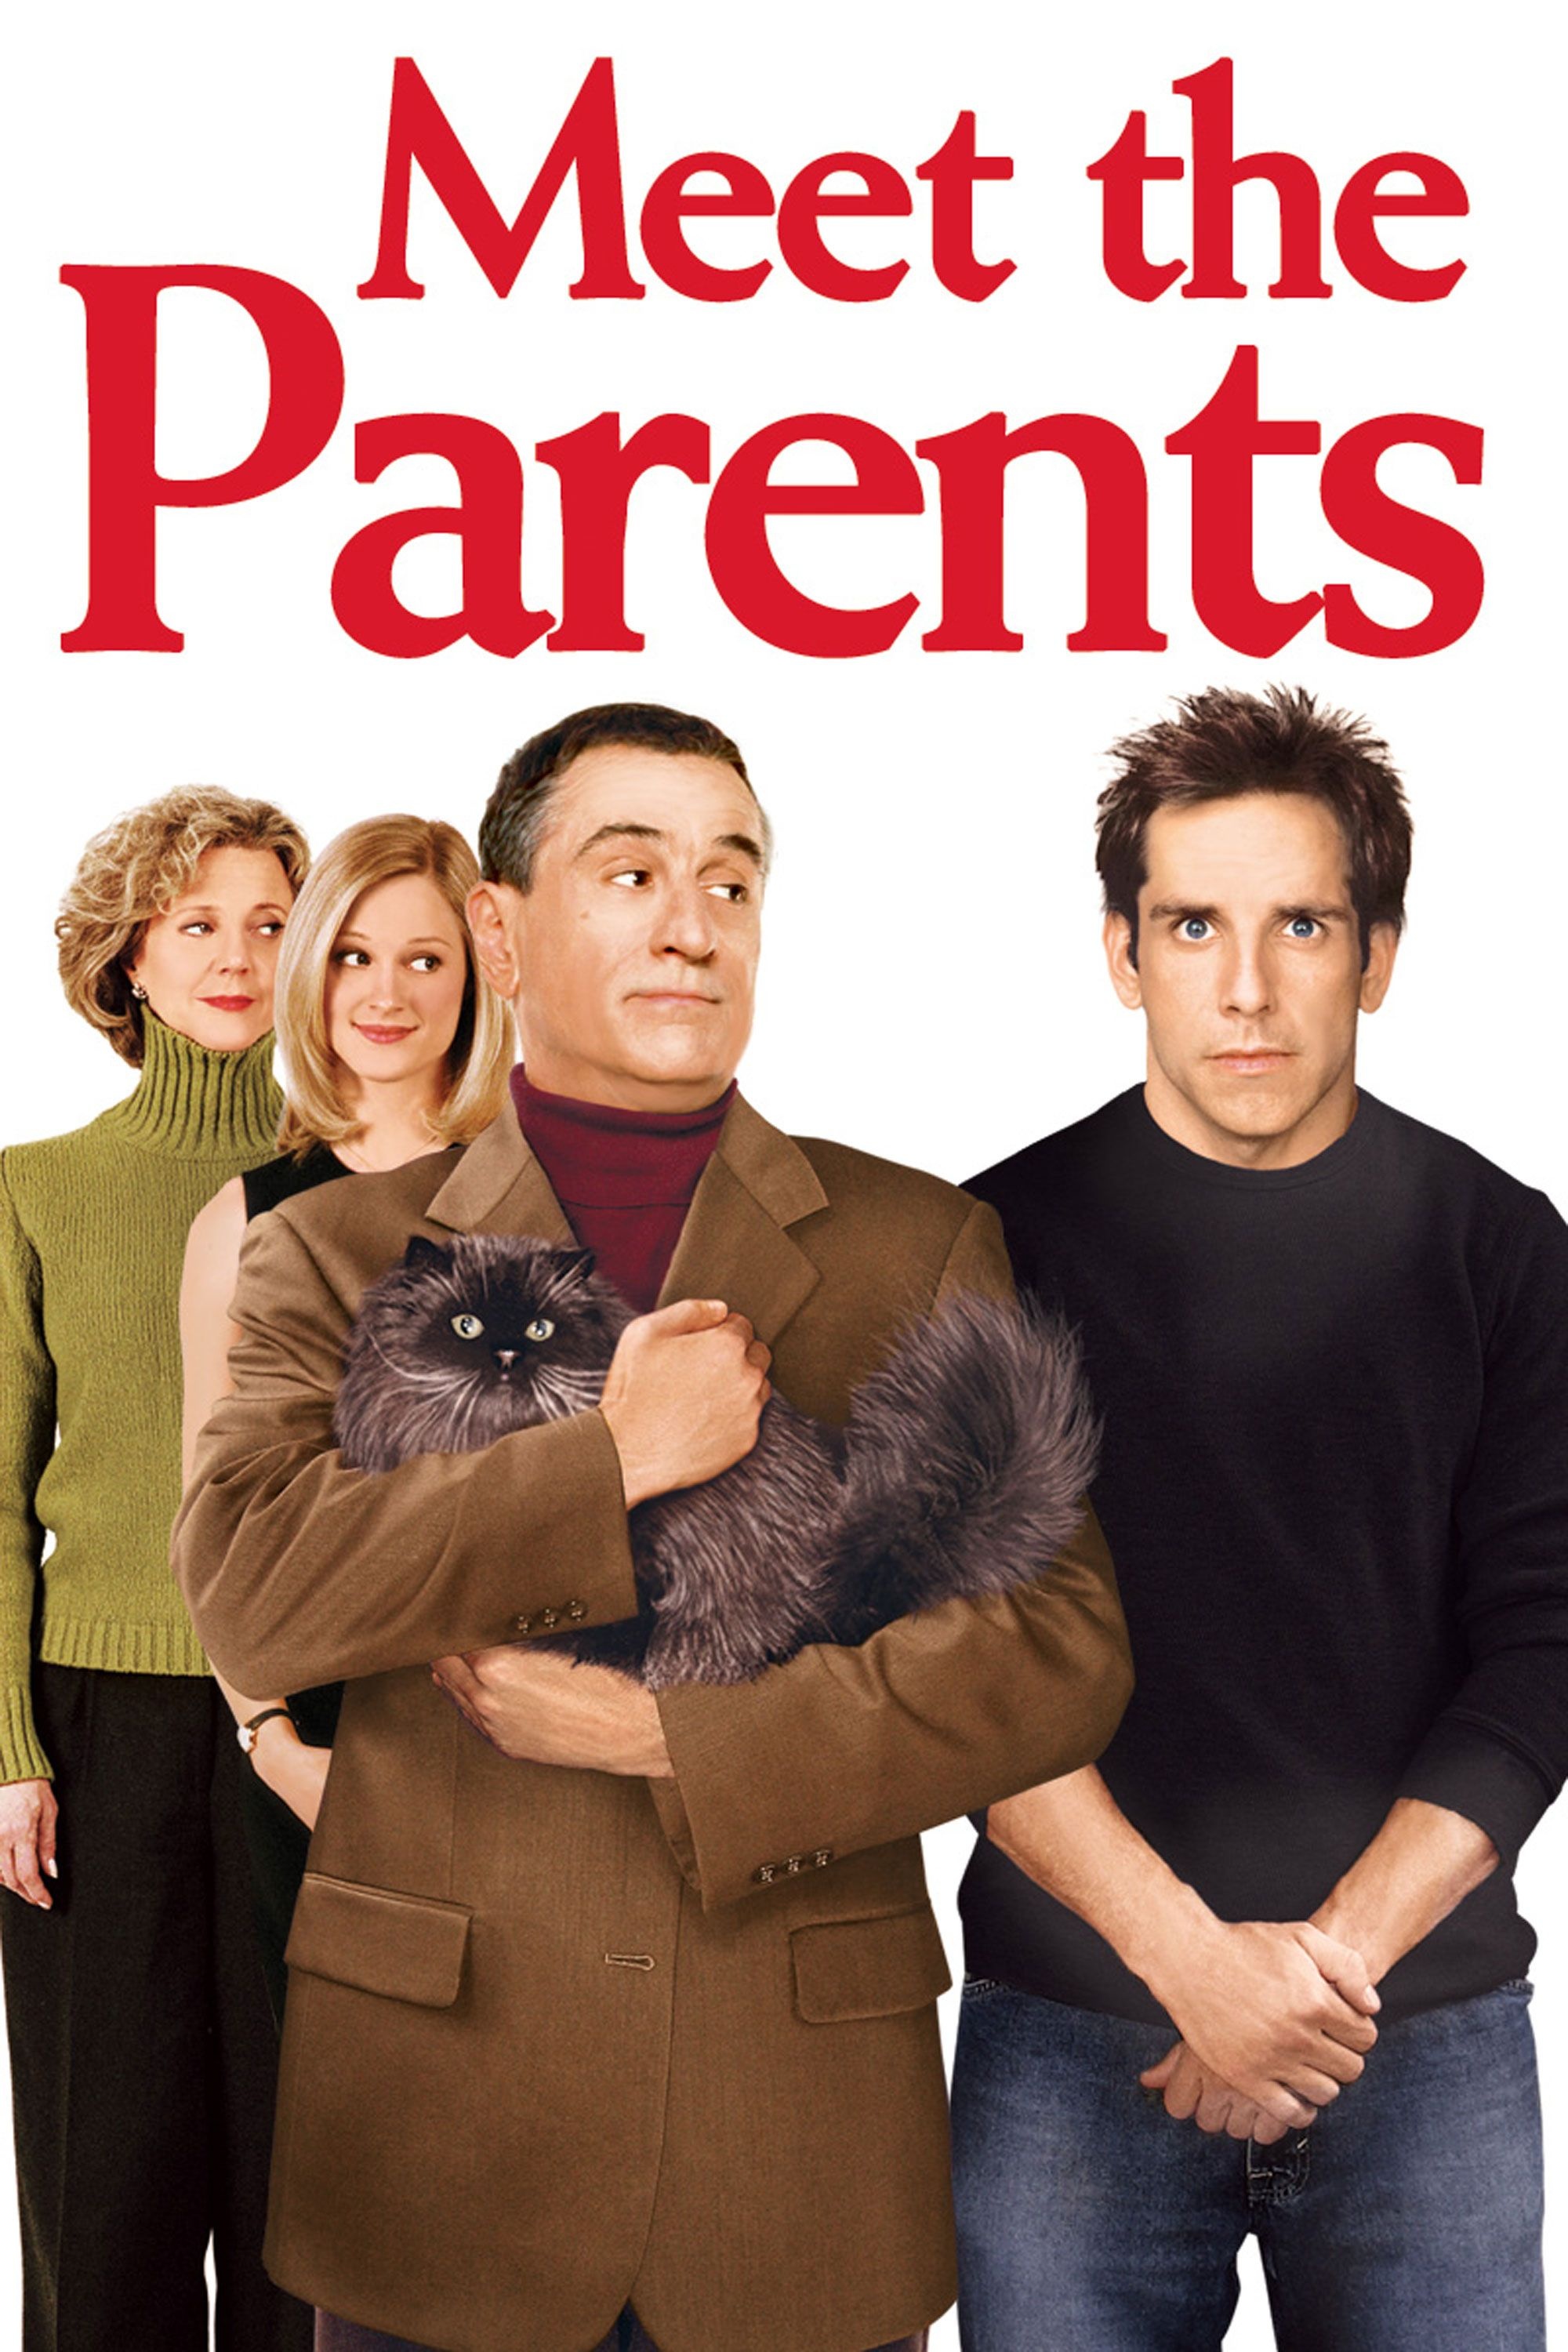 Meet the Parents, Family comedy, Complicated relationships, Chaos ensues, 2000x3000 HD Handy